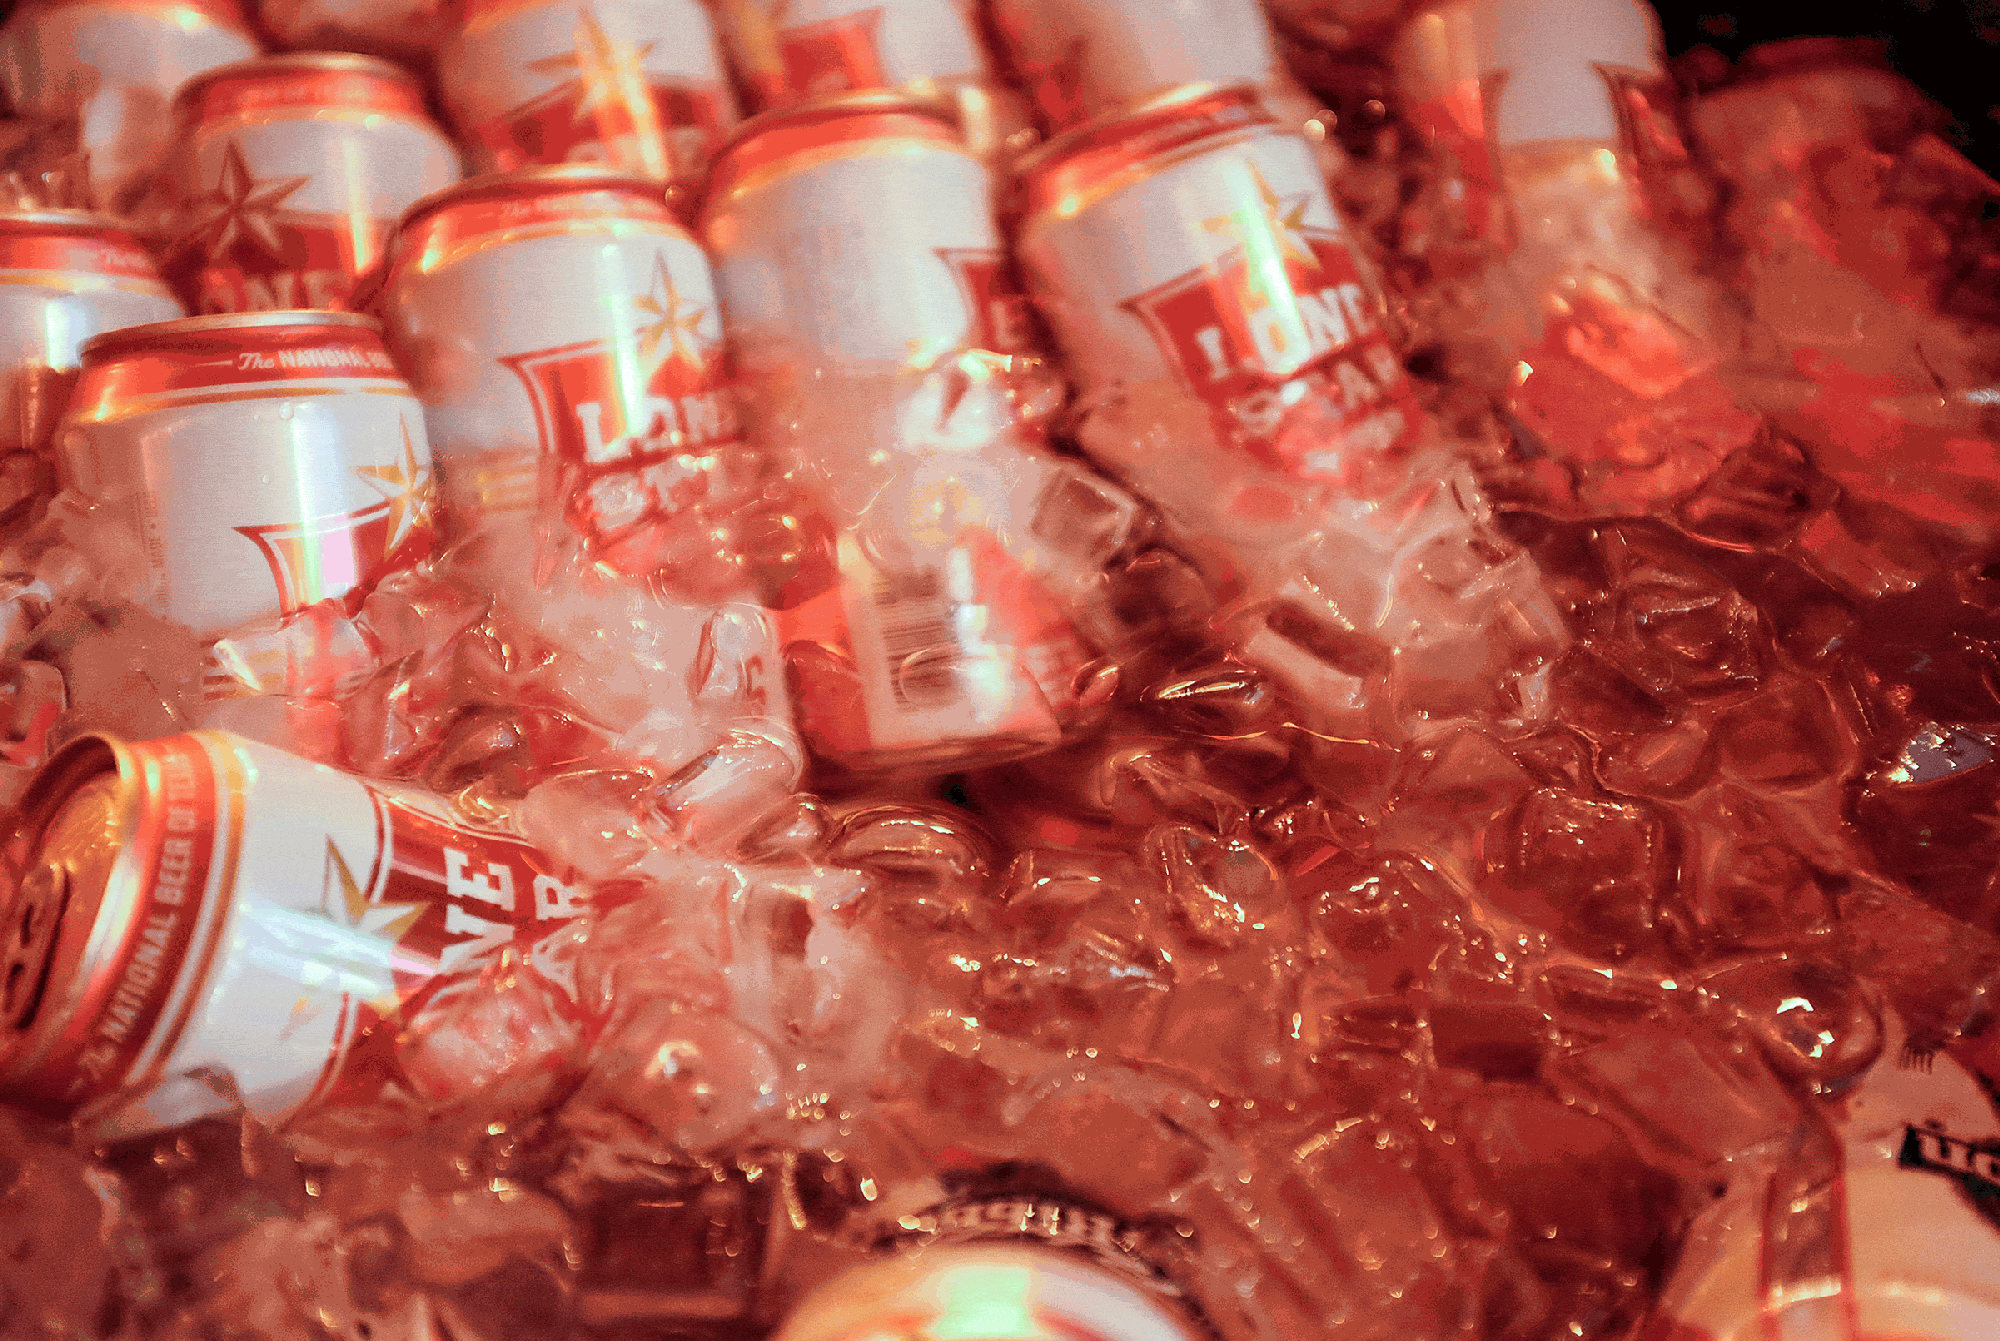 A bartender pulls a Lonestar beer from a cooler full of beer and ice, photographed by Todd Spoth